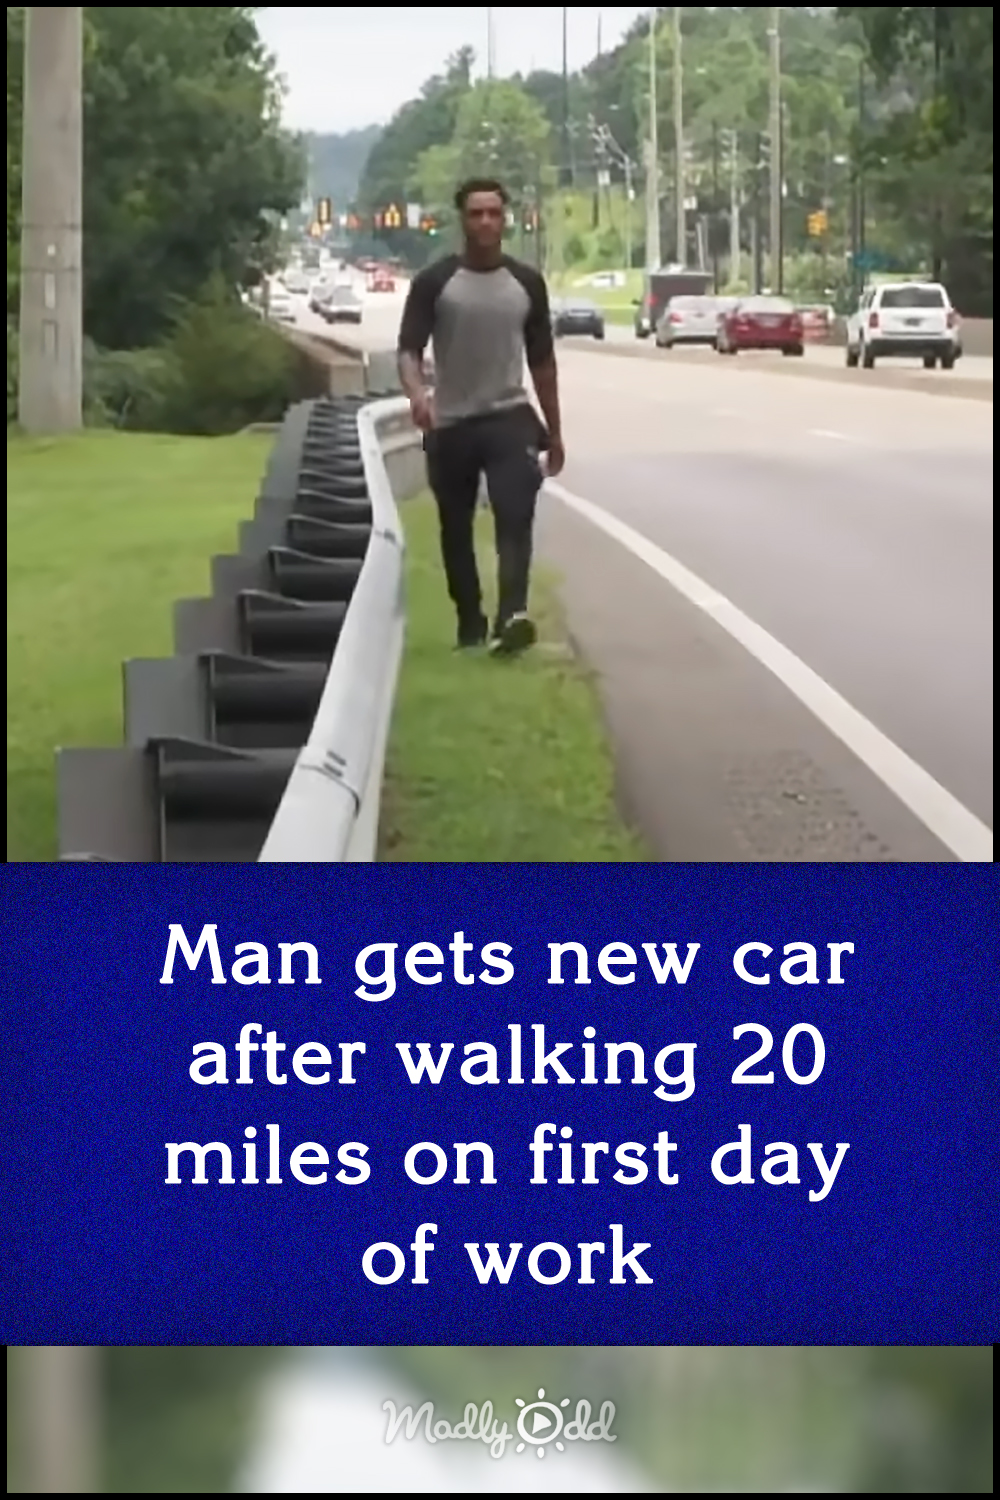 Man gets new car after walking 20 miles on first day of work